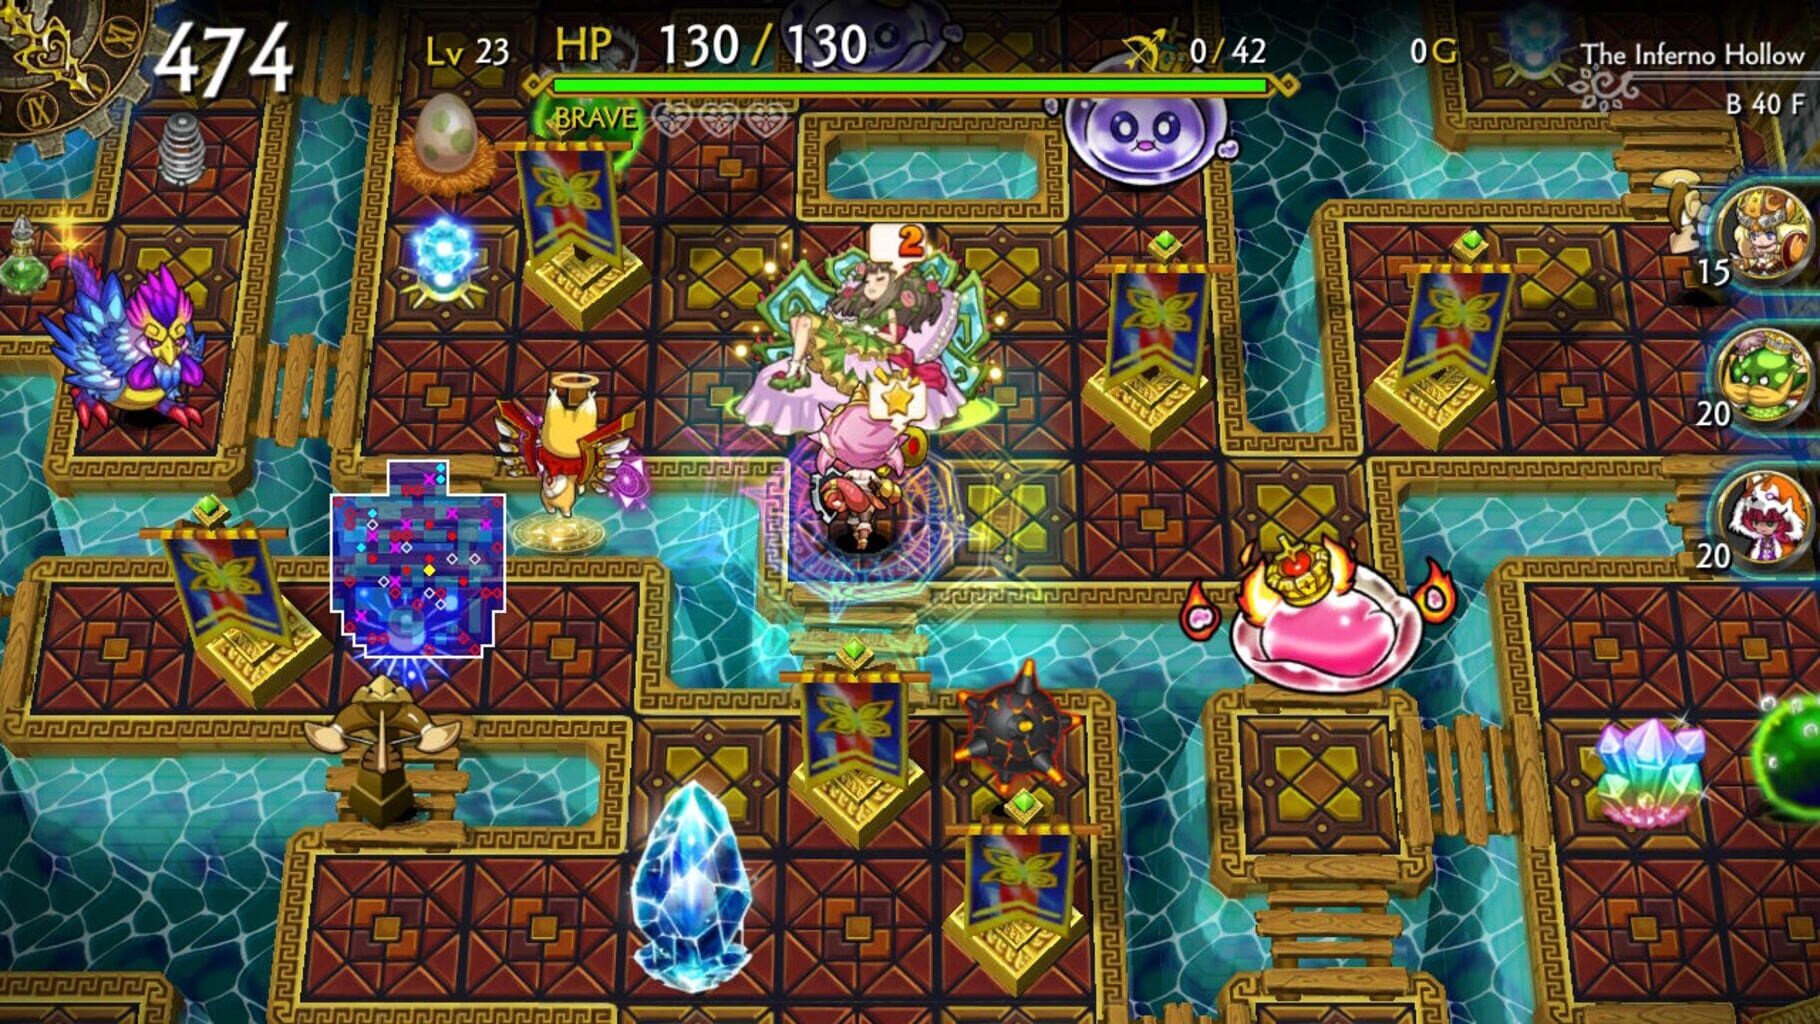 Dragon Fang Z: The Rose & Dungeon of Time - Extra Dungeon: The Inferno Hollow screenshot